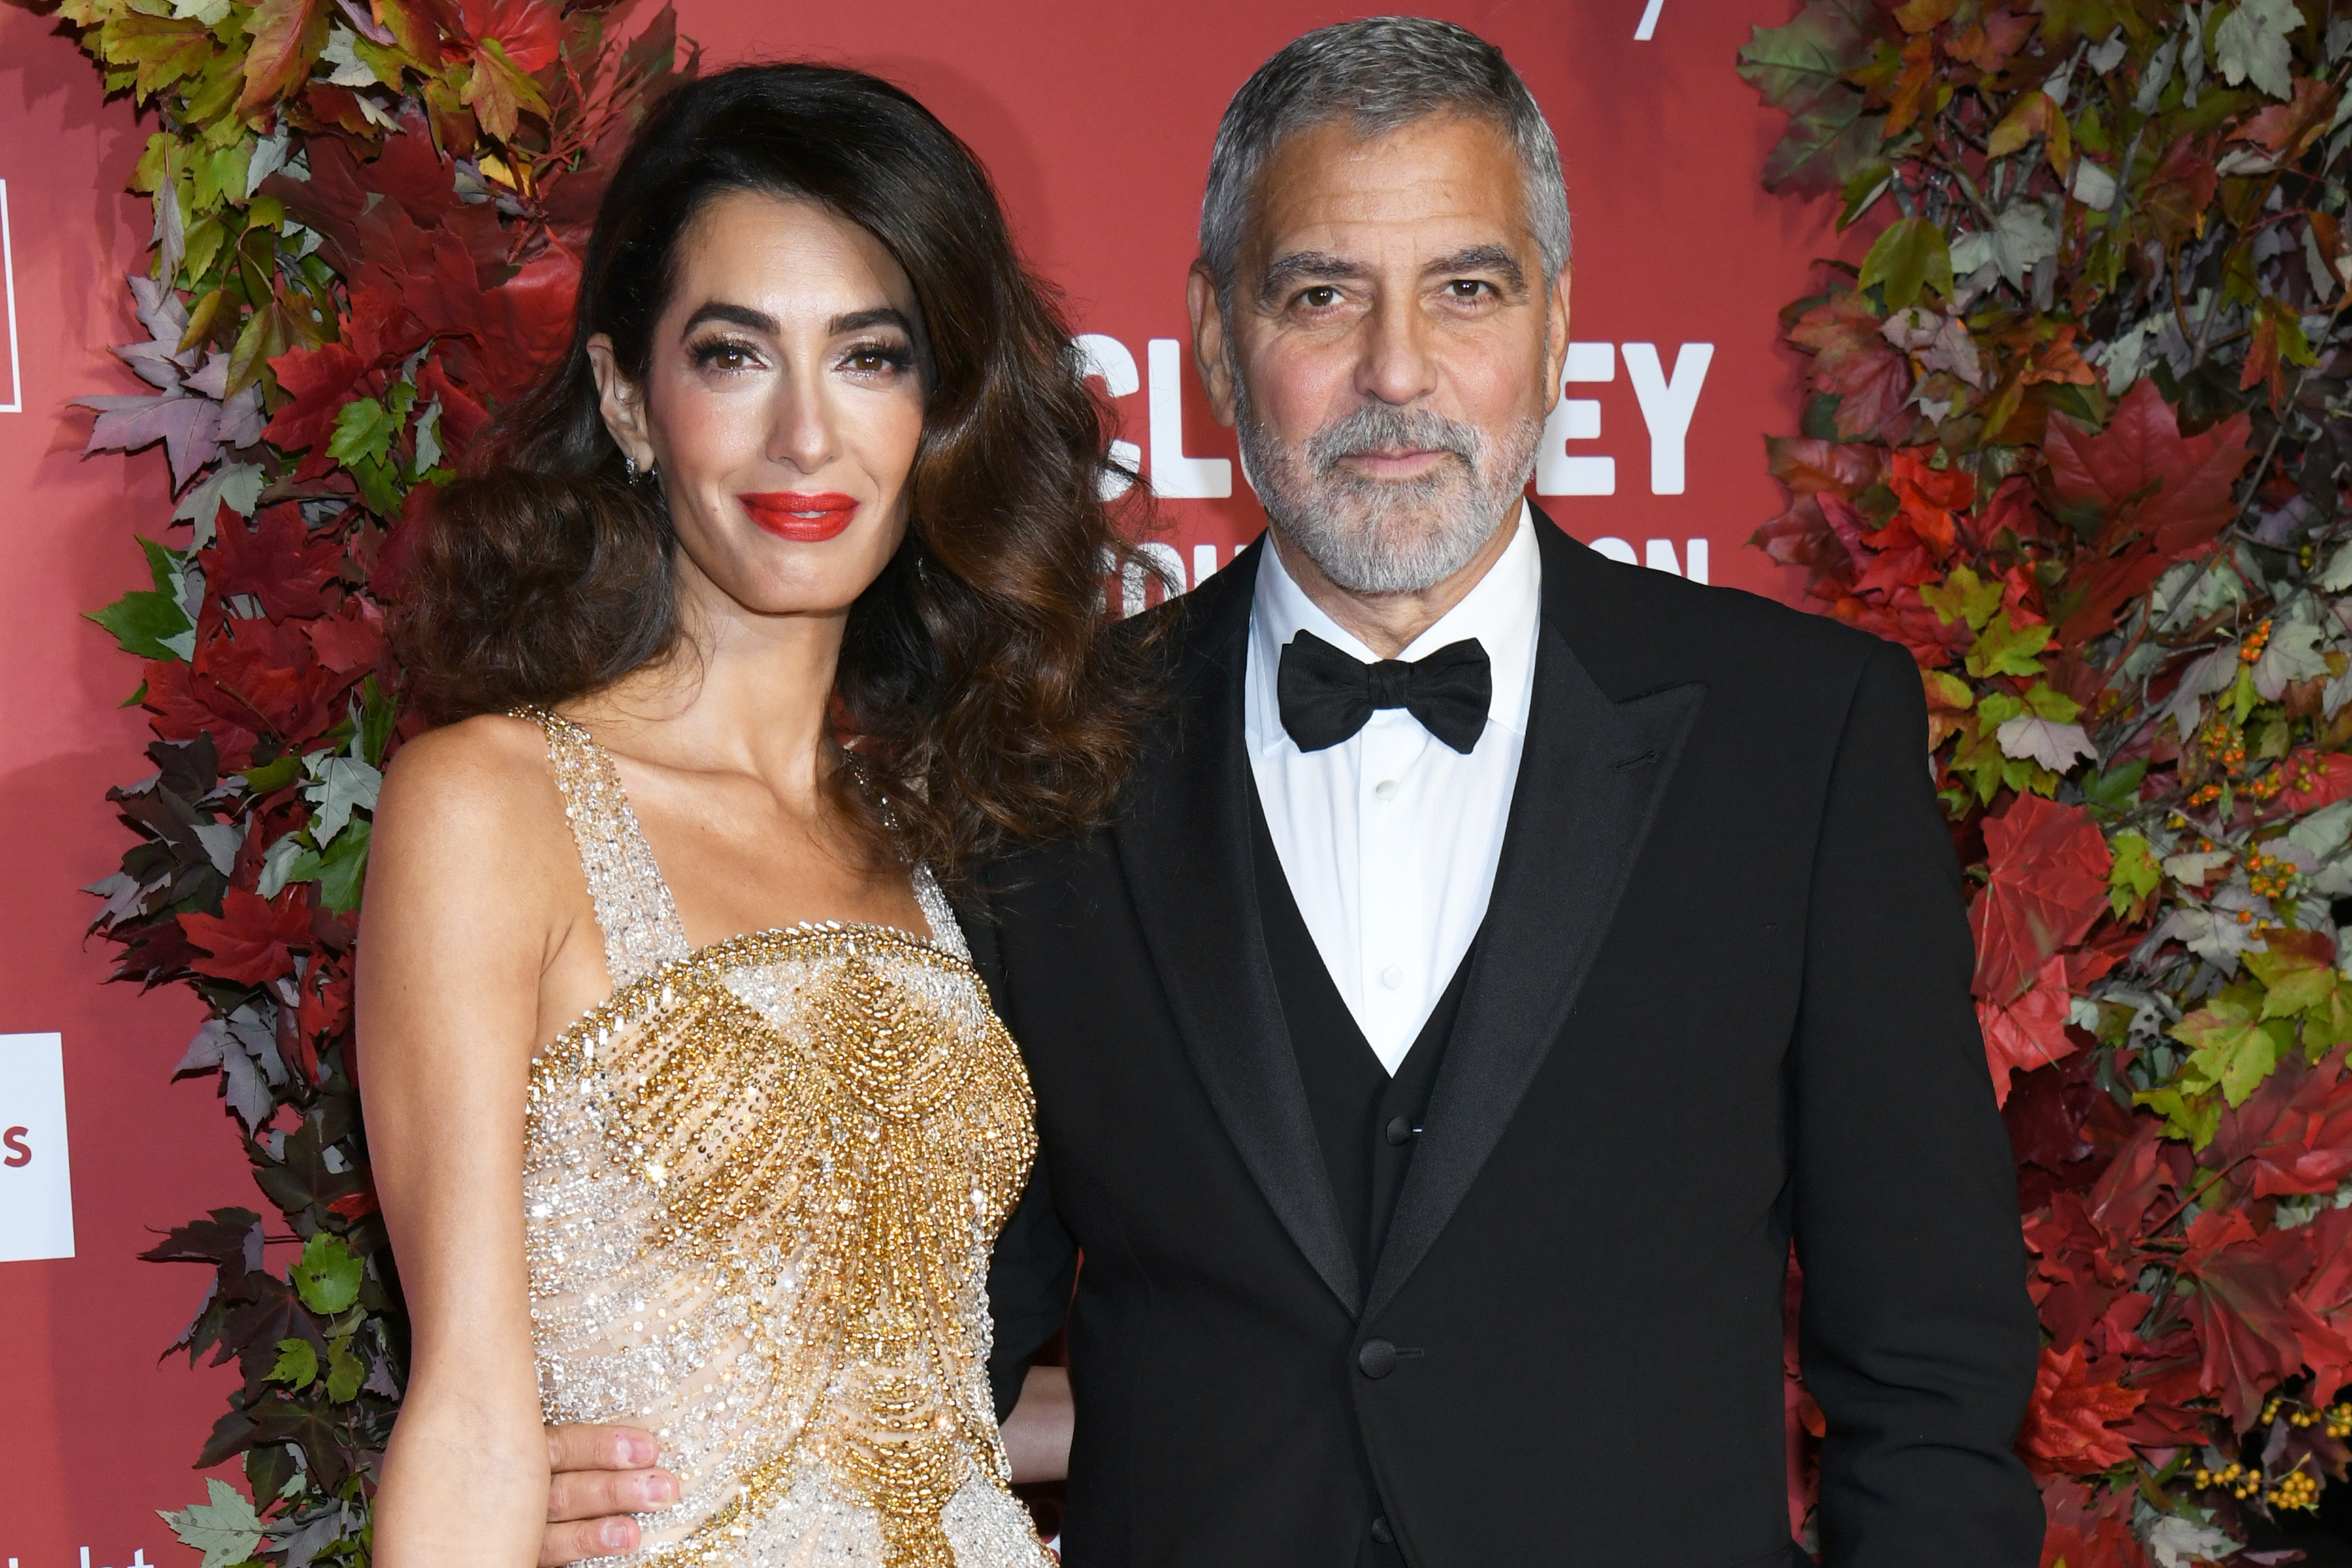 Amal and George Clooney at the Albie Awards in New York City on September 29, 2022 | Source: Getty Images